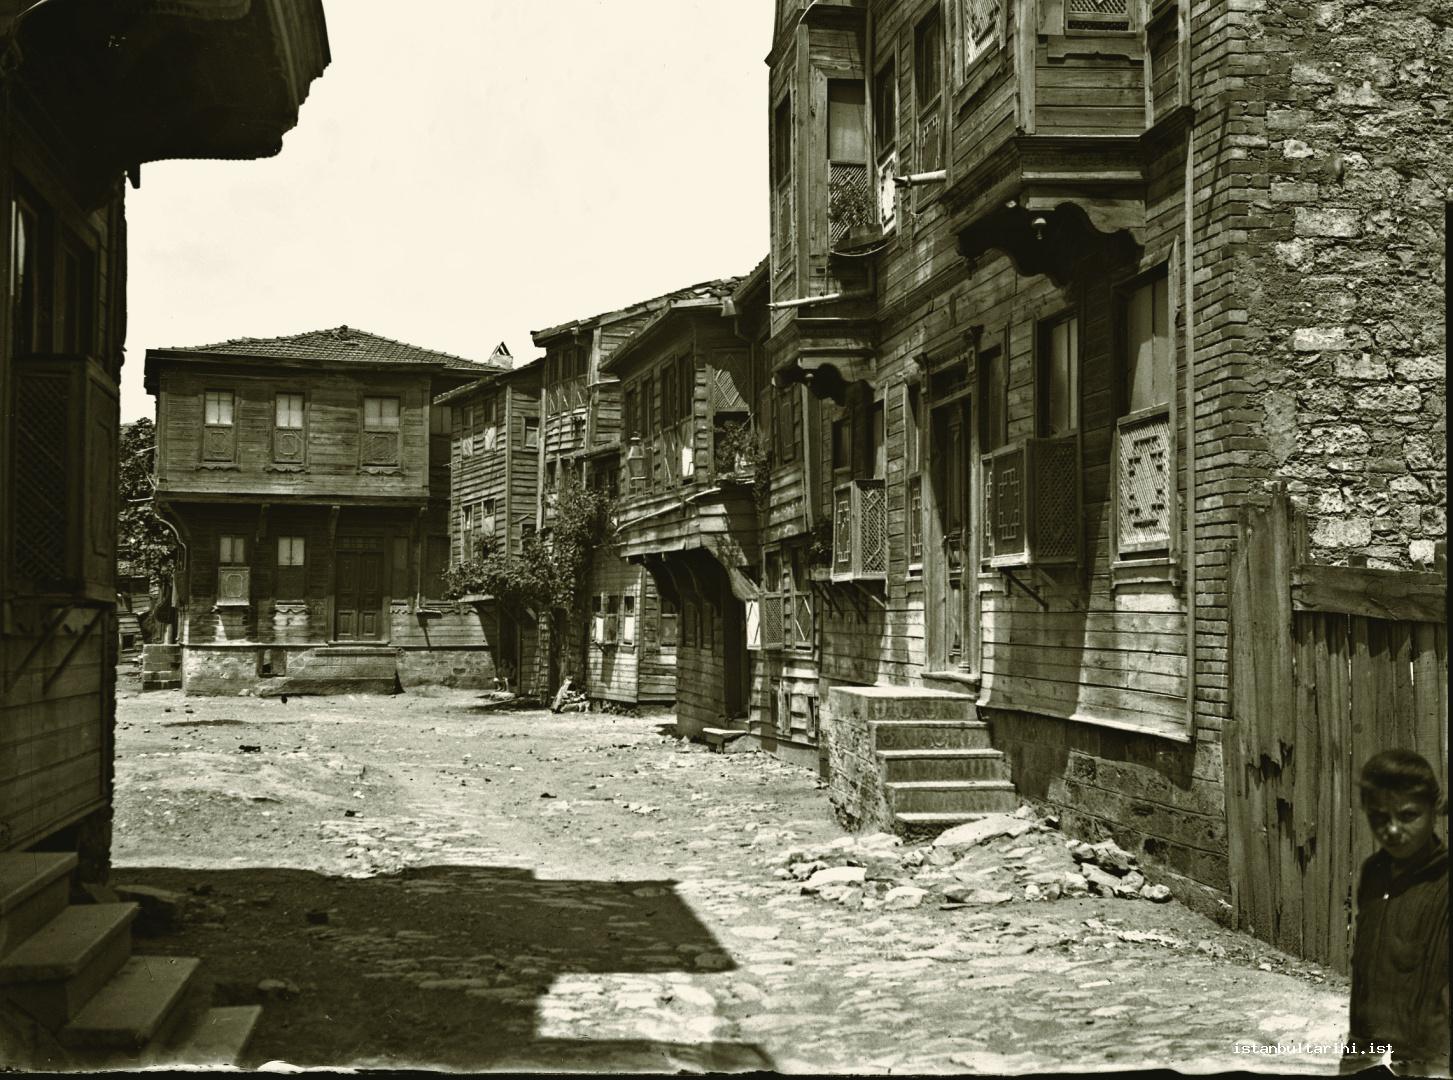 4- These wooden houses which do not exist anymore were the determining elements of the aesthetics of Istanbul. To be able to show to our future generations in what kind of a city we once lived, we should have kept at least a couple of neighborhoods of those wooden houses.